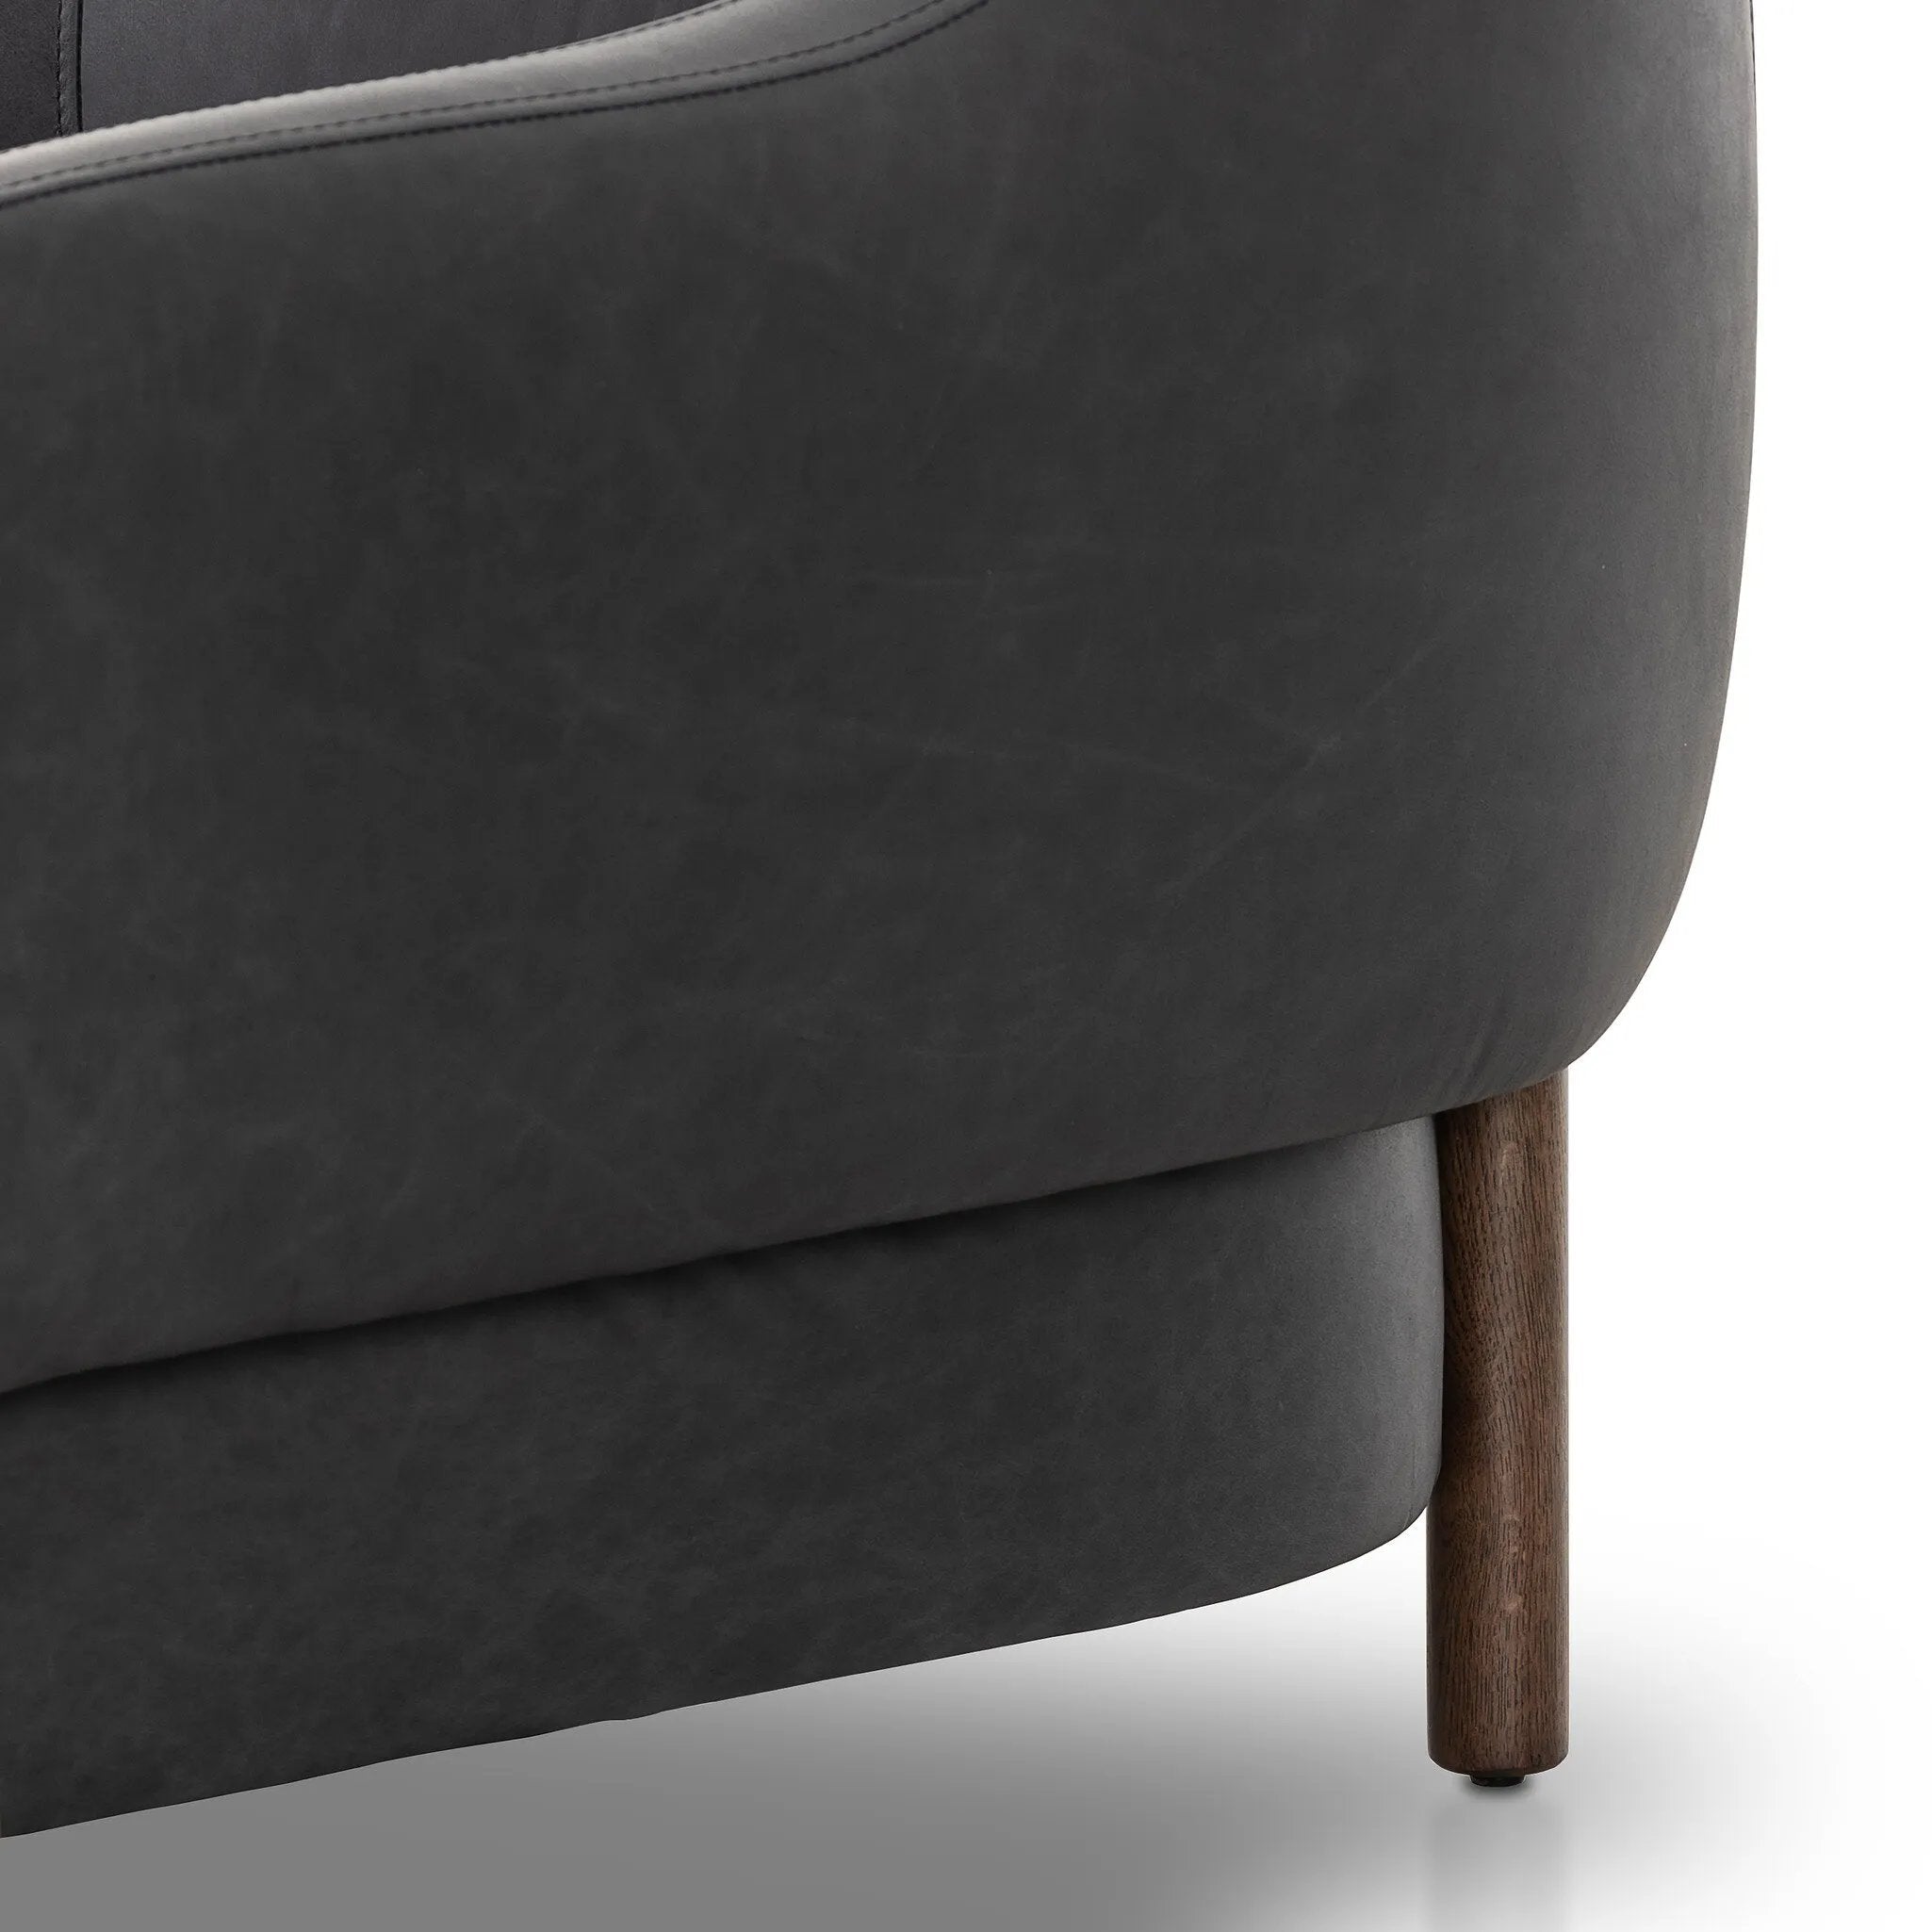 This elevated arm chair features a clean top piece that partially overlaps its bottom counterpart and seamlesssly blends the back cushion into the armrests in one fluid form. The seat's legs appear to extend from the seat and back, adding architectural interest. Amethyst Home provides interior design, new home construction design consulting, vintage area rugs, and lighting in the Miami metro area.